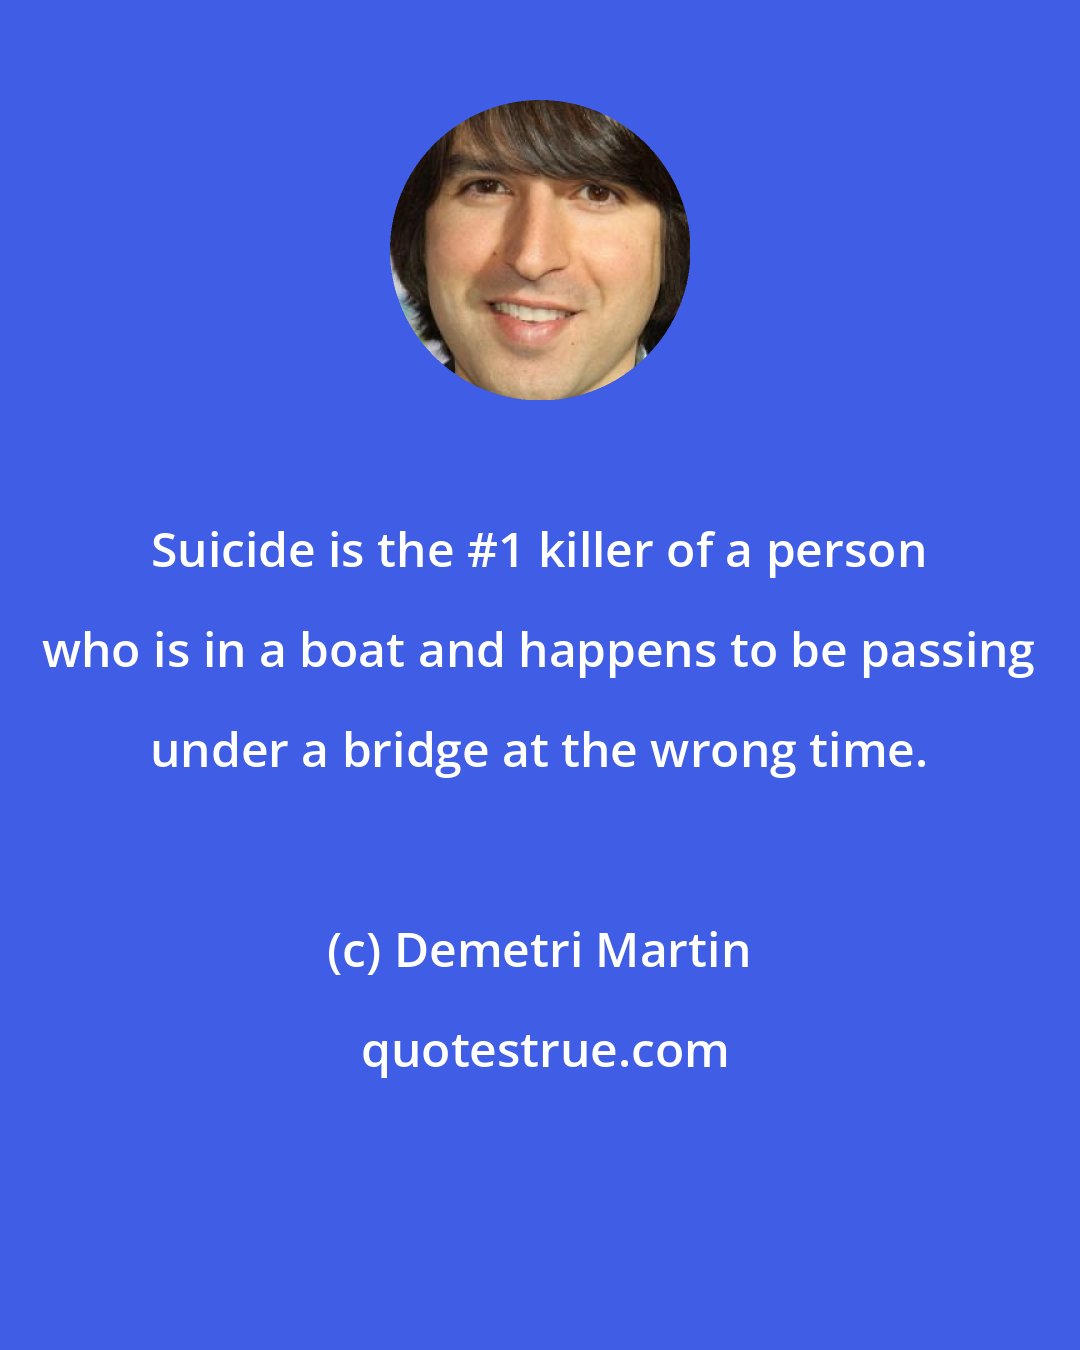 Demetri Martin: Suicide is the #1 killer of a person who is in a boat and happens to be passing under a bridge at the wrong time.